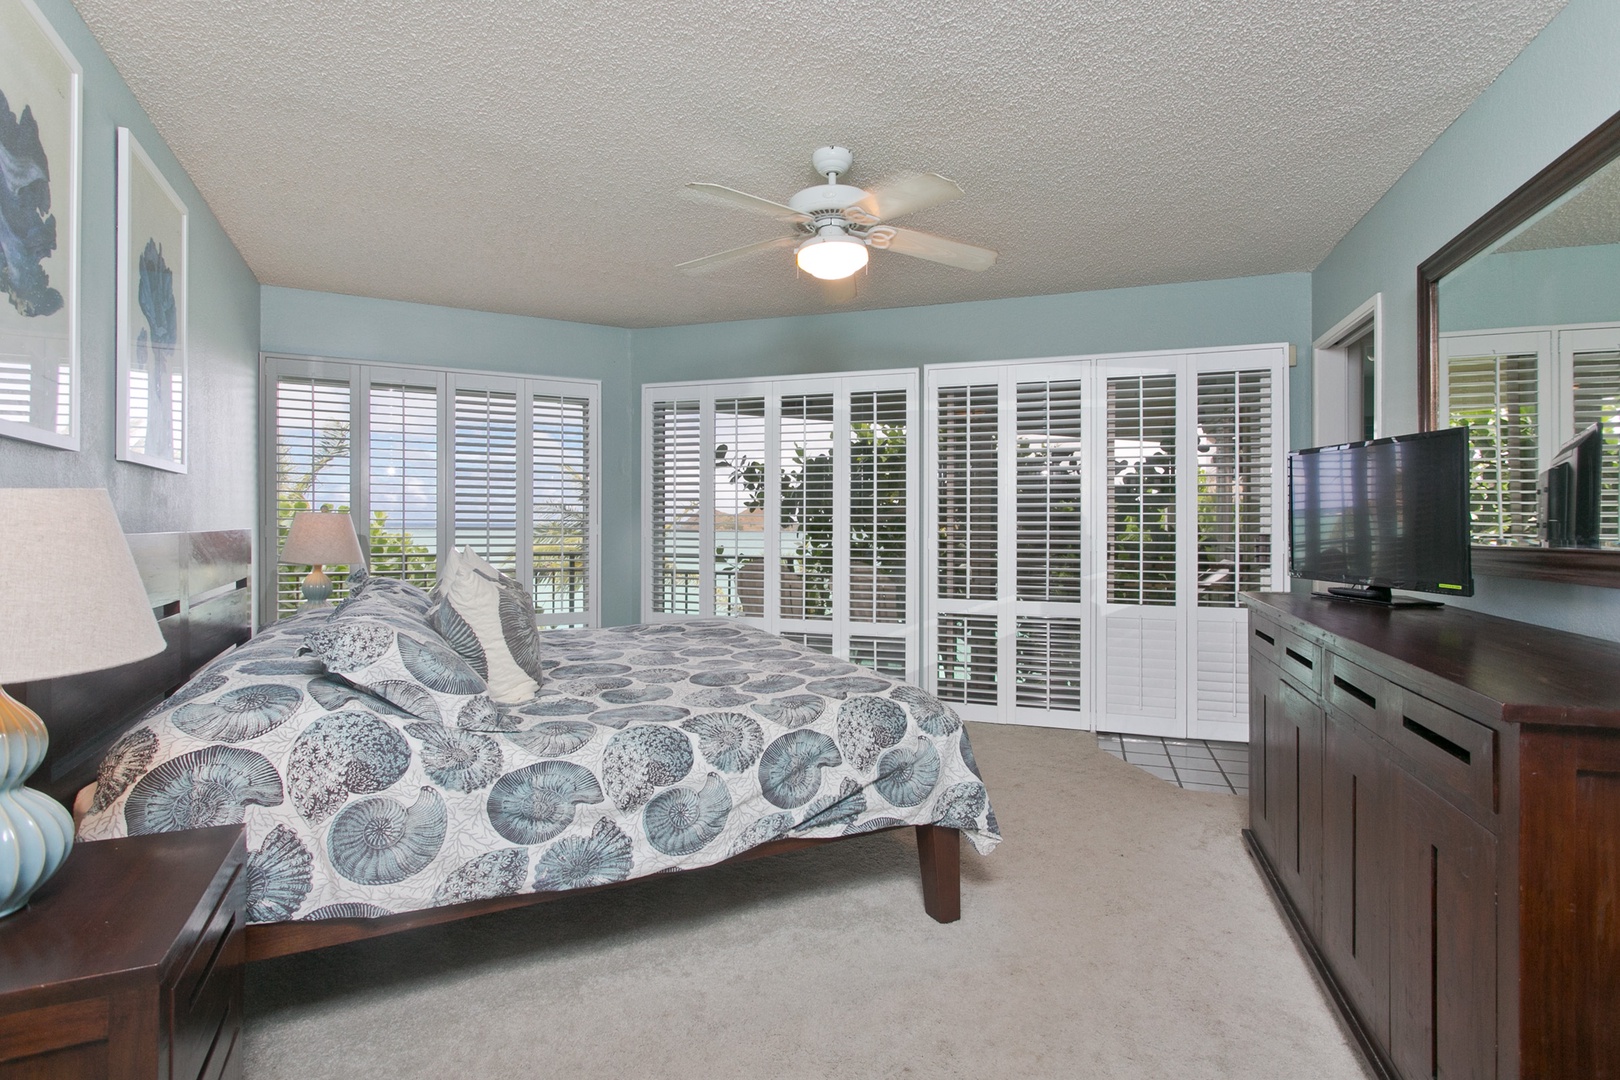 Kailua Vacation Rentals, Hale Kolea* - Guest bedroom 2 with access to private lanai.